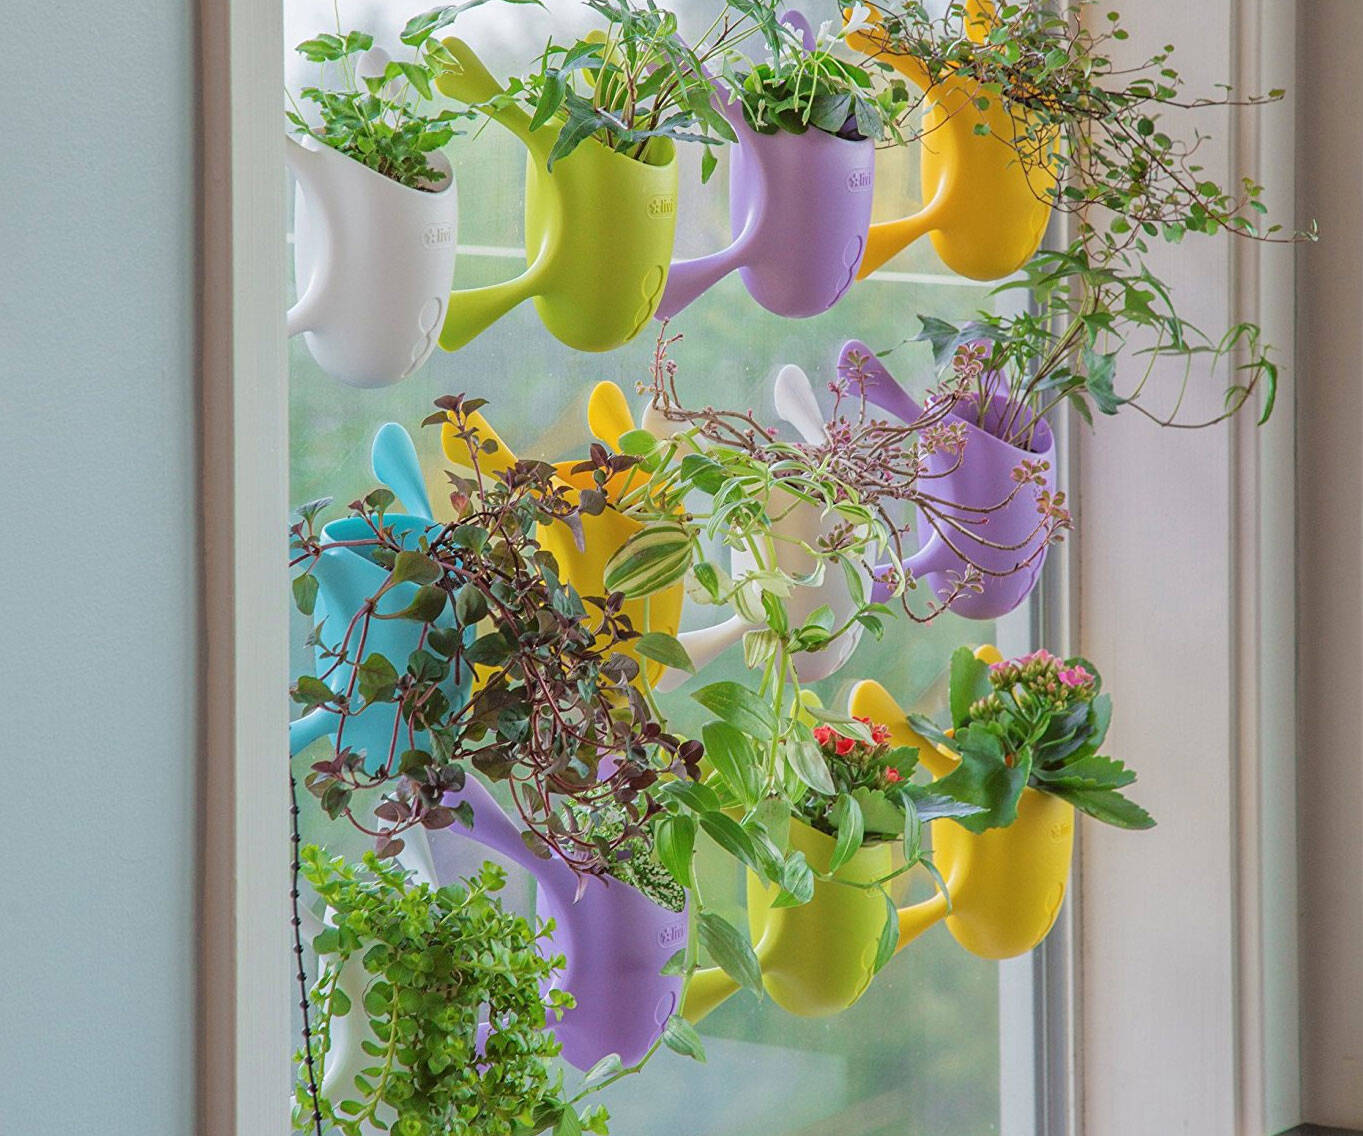 Indoor Suctioned Window/Wall Planter - coolthings.us